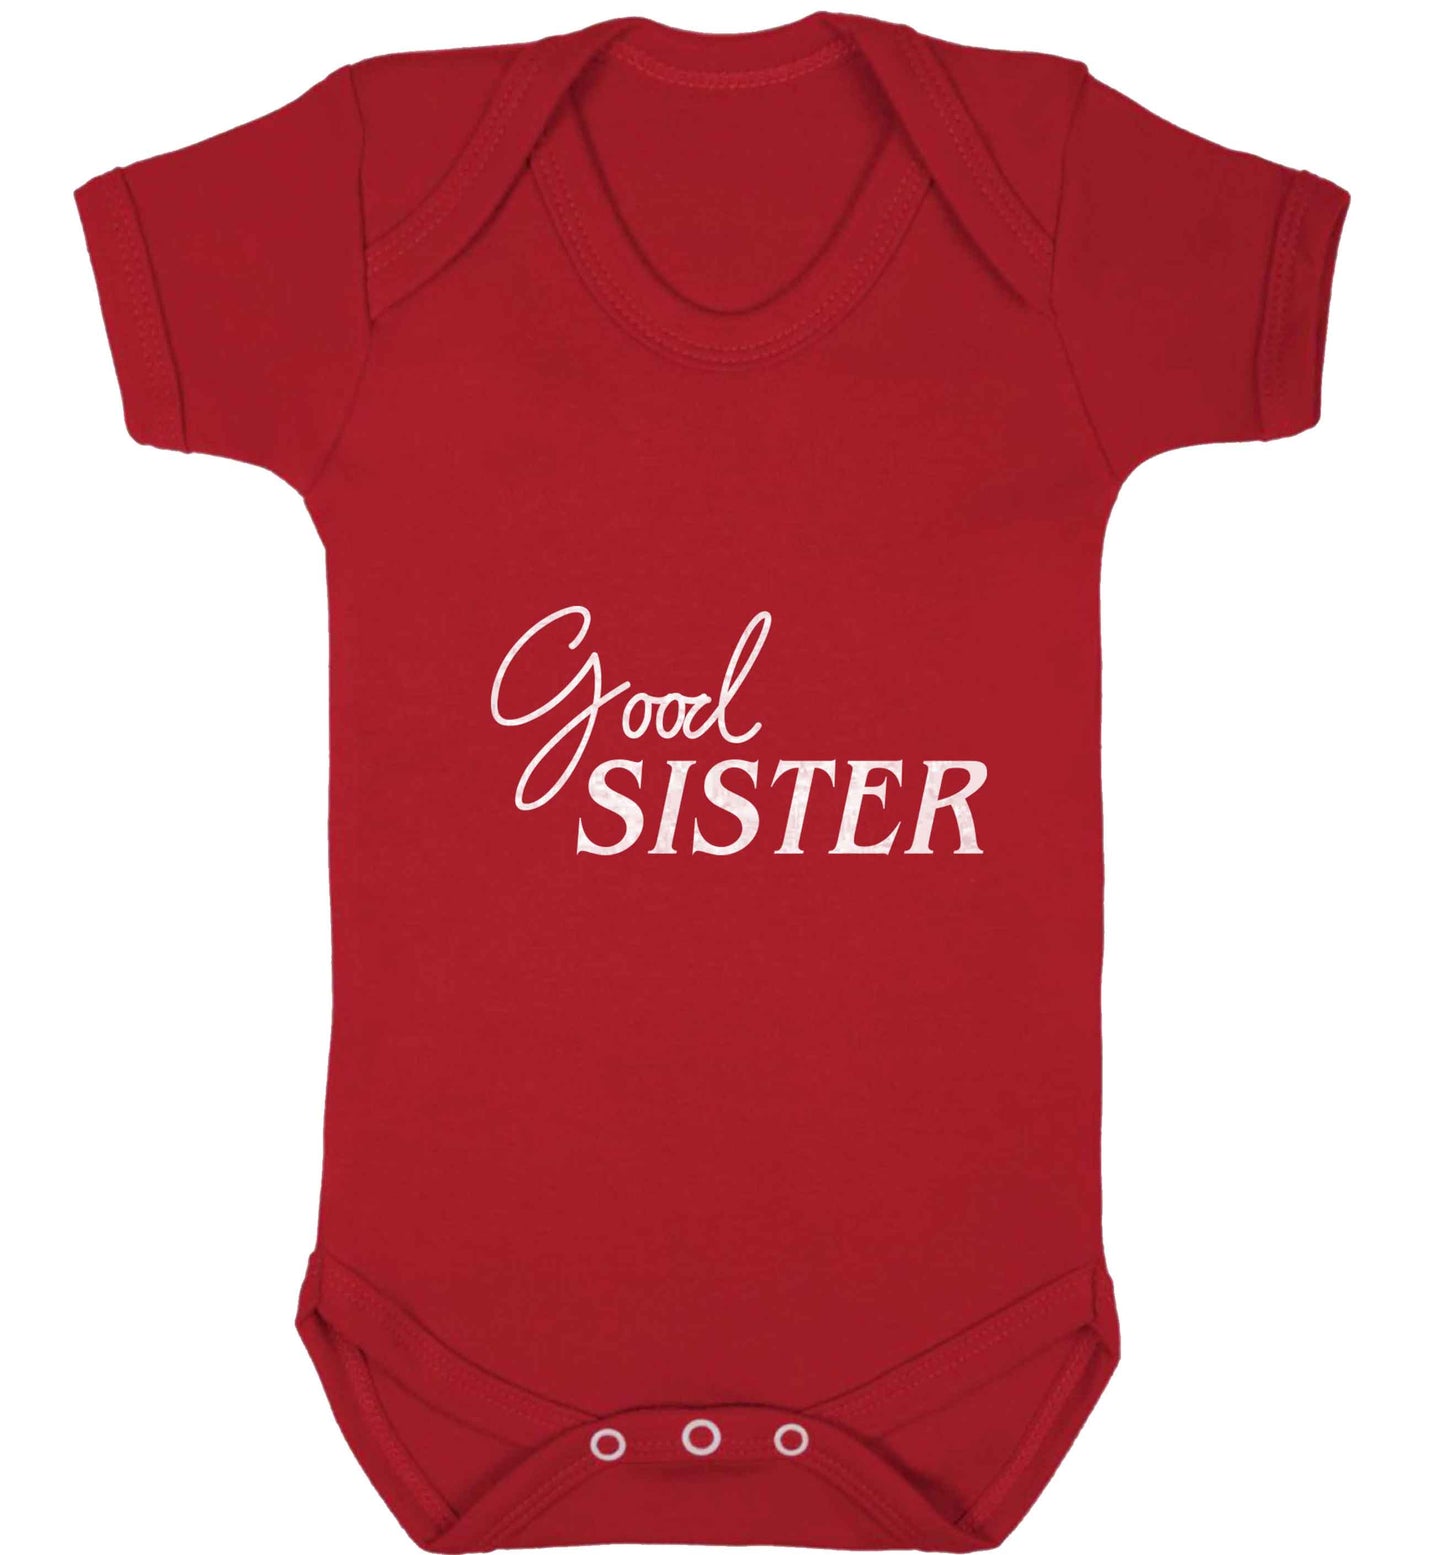 Good sister baby vest red 18-24 months